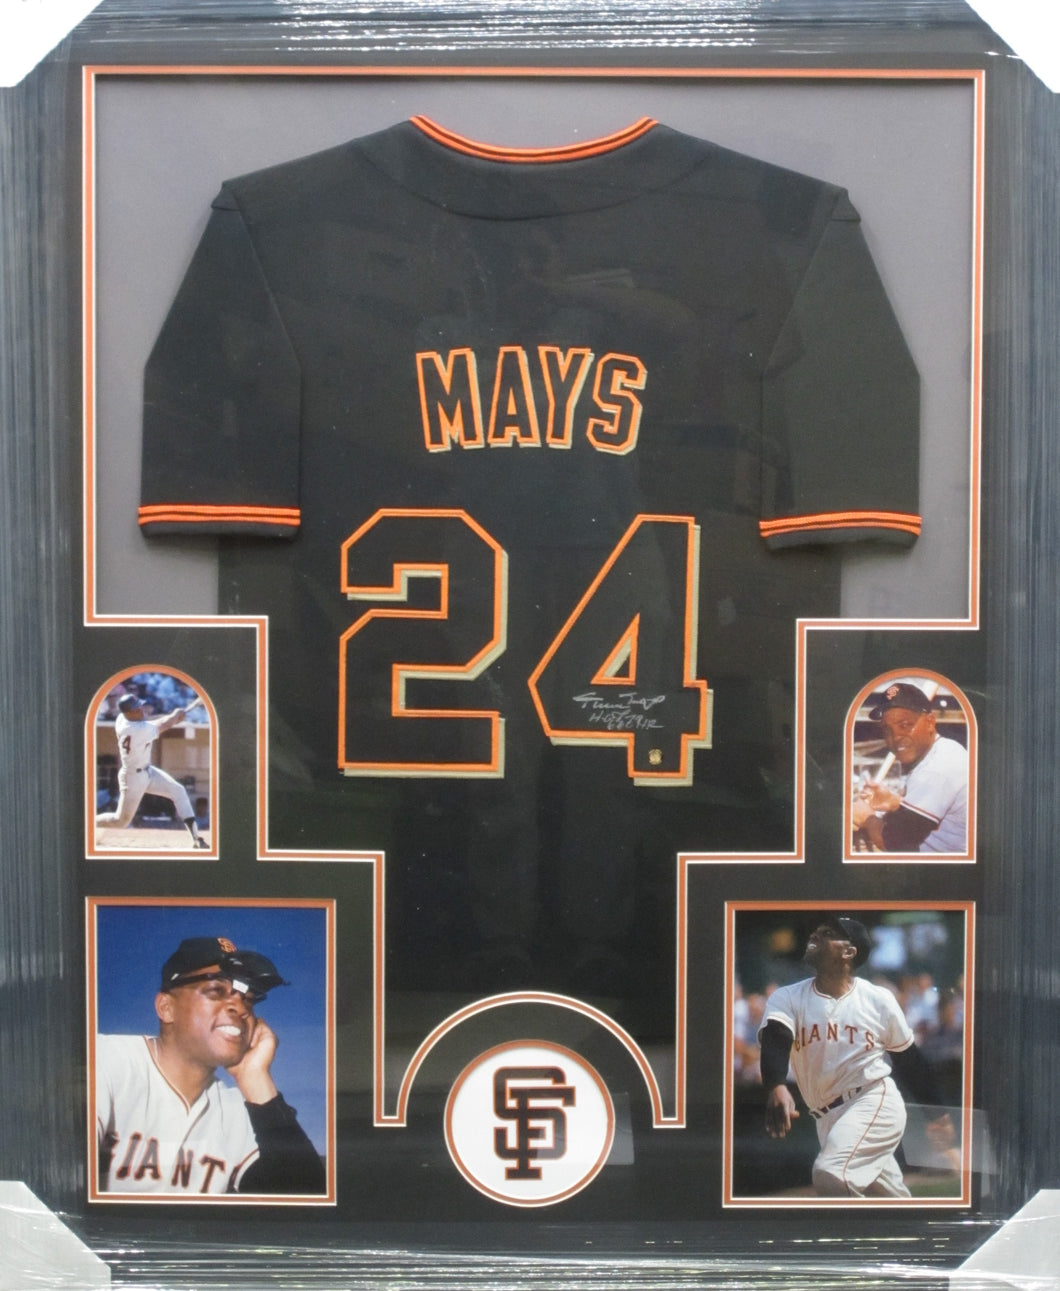 San Francisco Giants Willie Mays Signed Jersey with HOF 79 & 660 HR Inscriptions Framed & Matted with SAY HEY COA